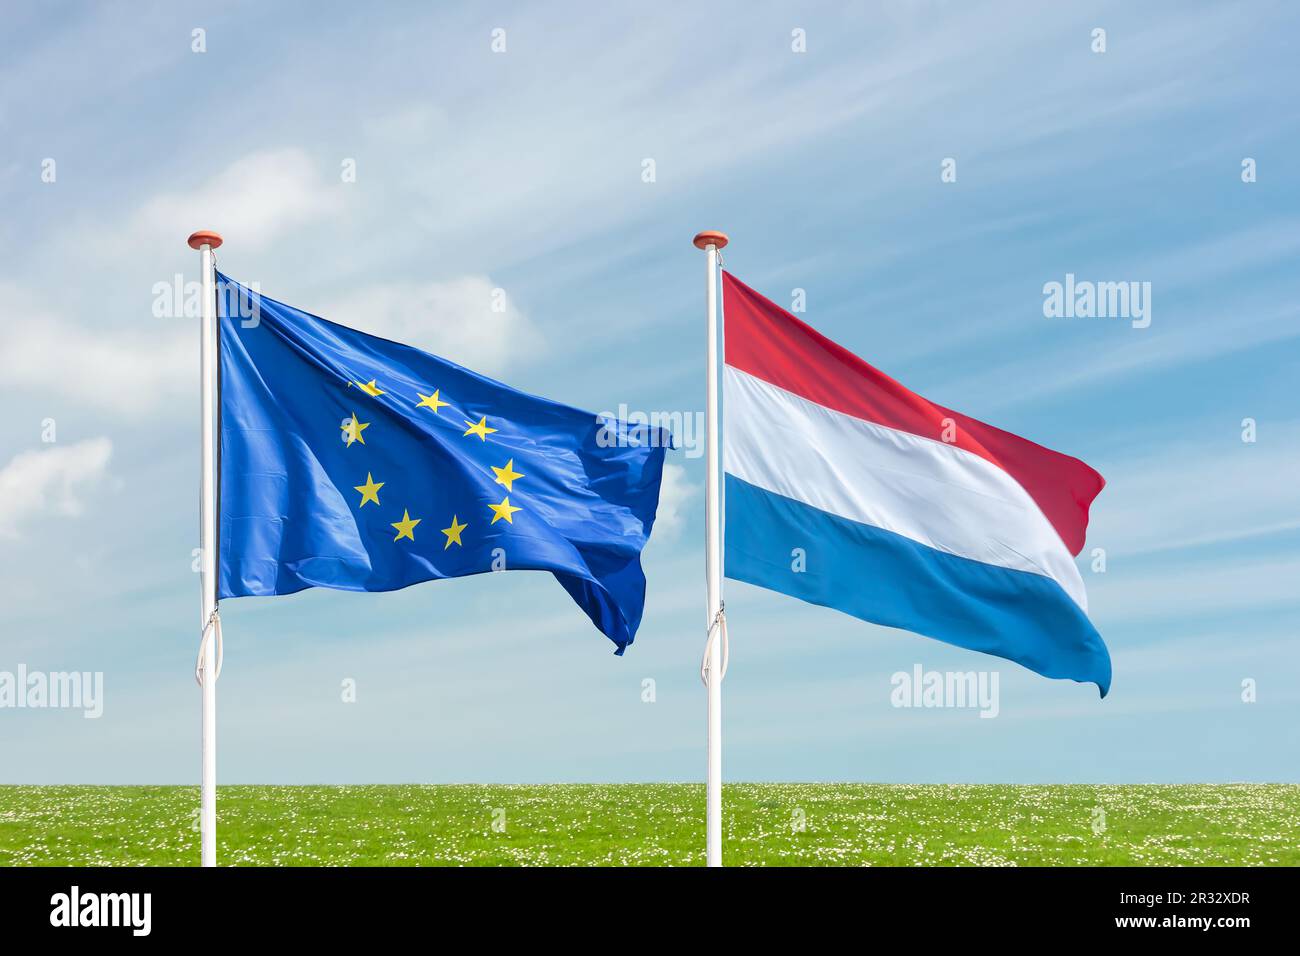 Waving flags of the European Union and The Netherlands in front of a grass meadow with blooming flowers and blue sky Stock Photo